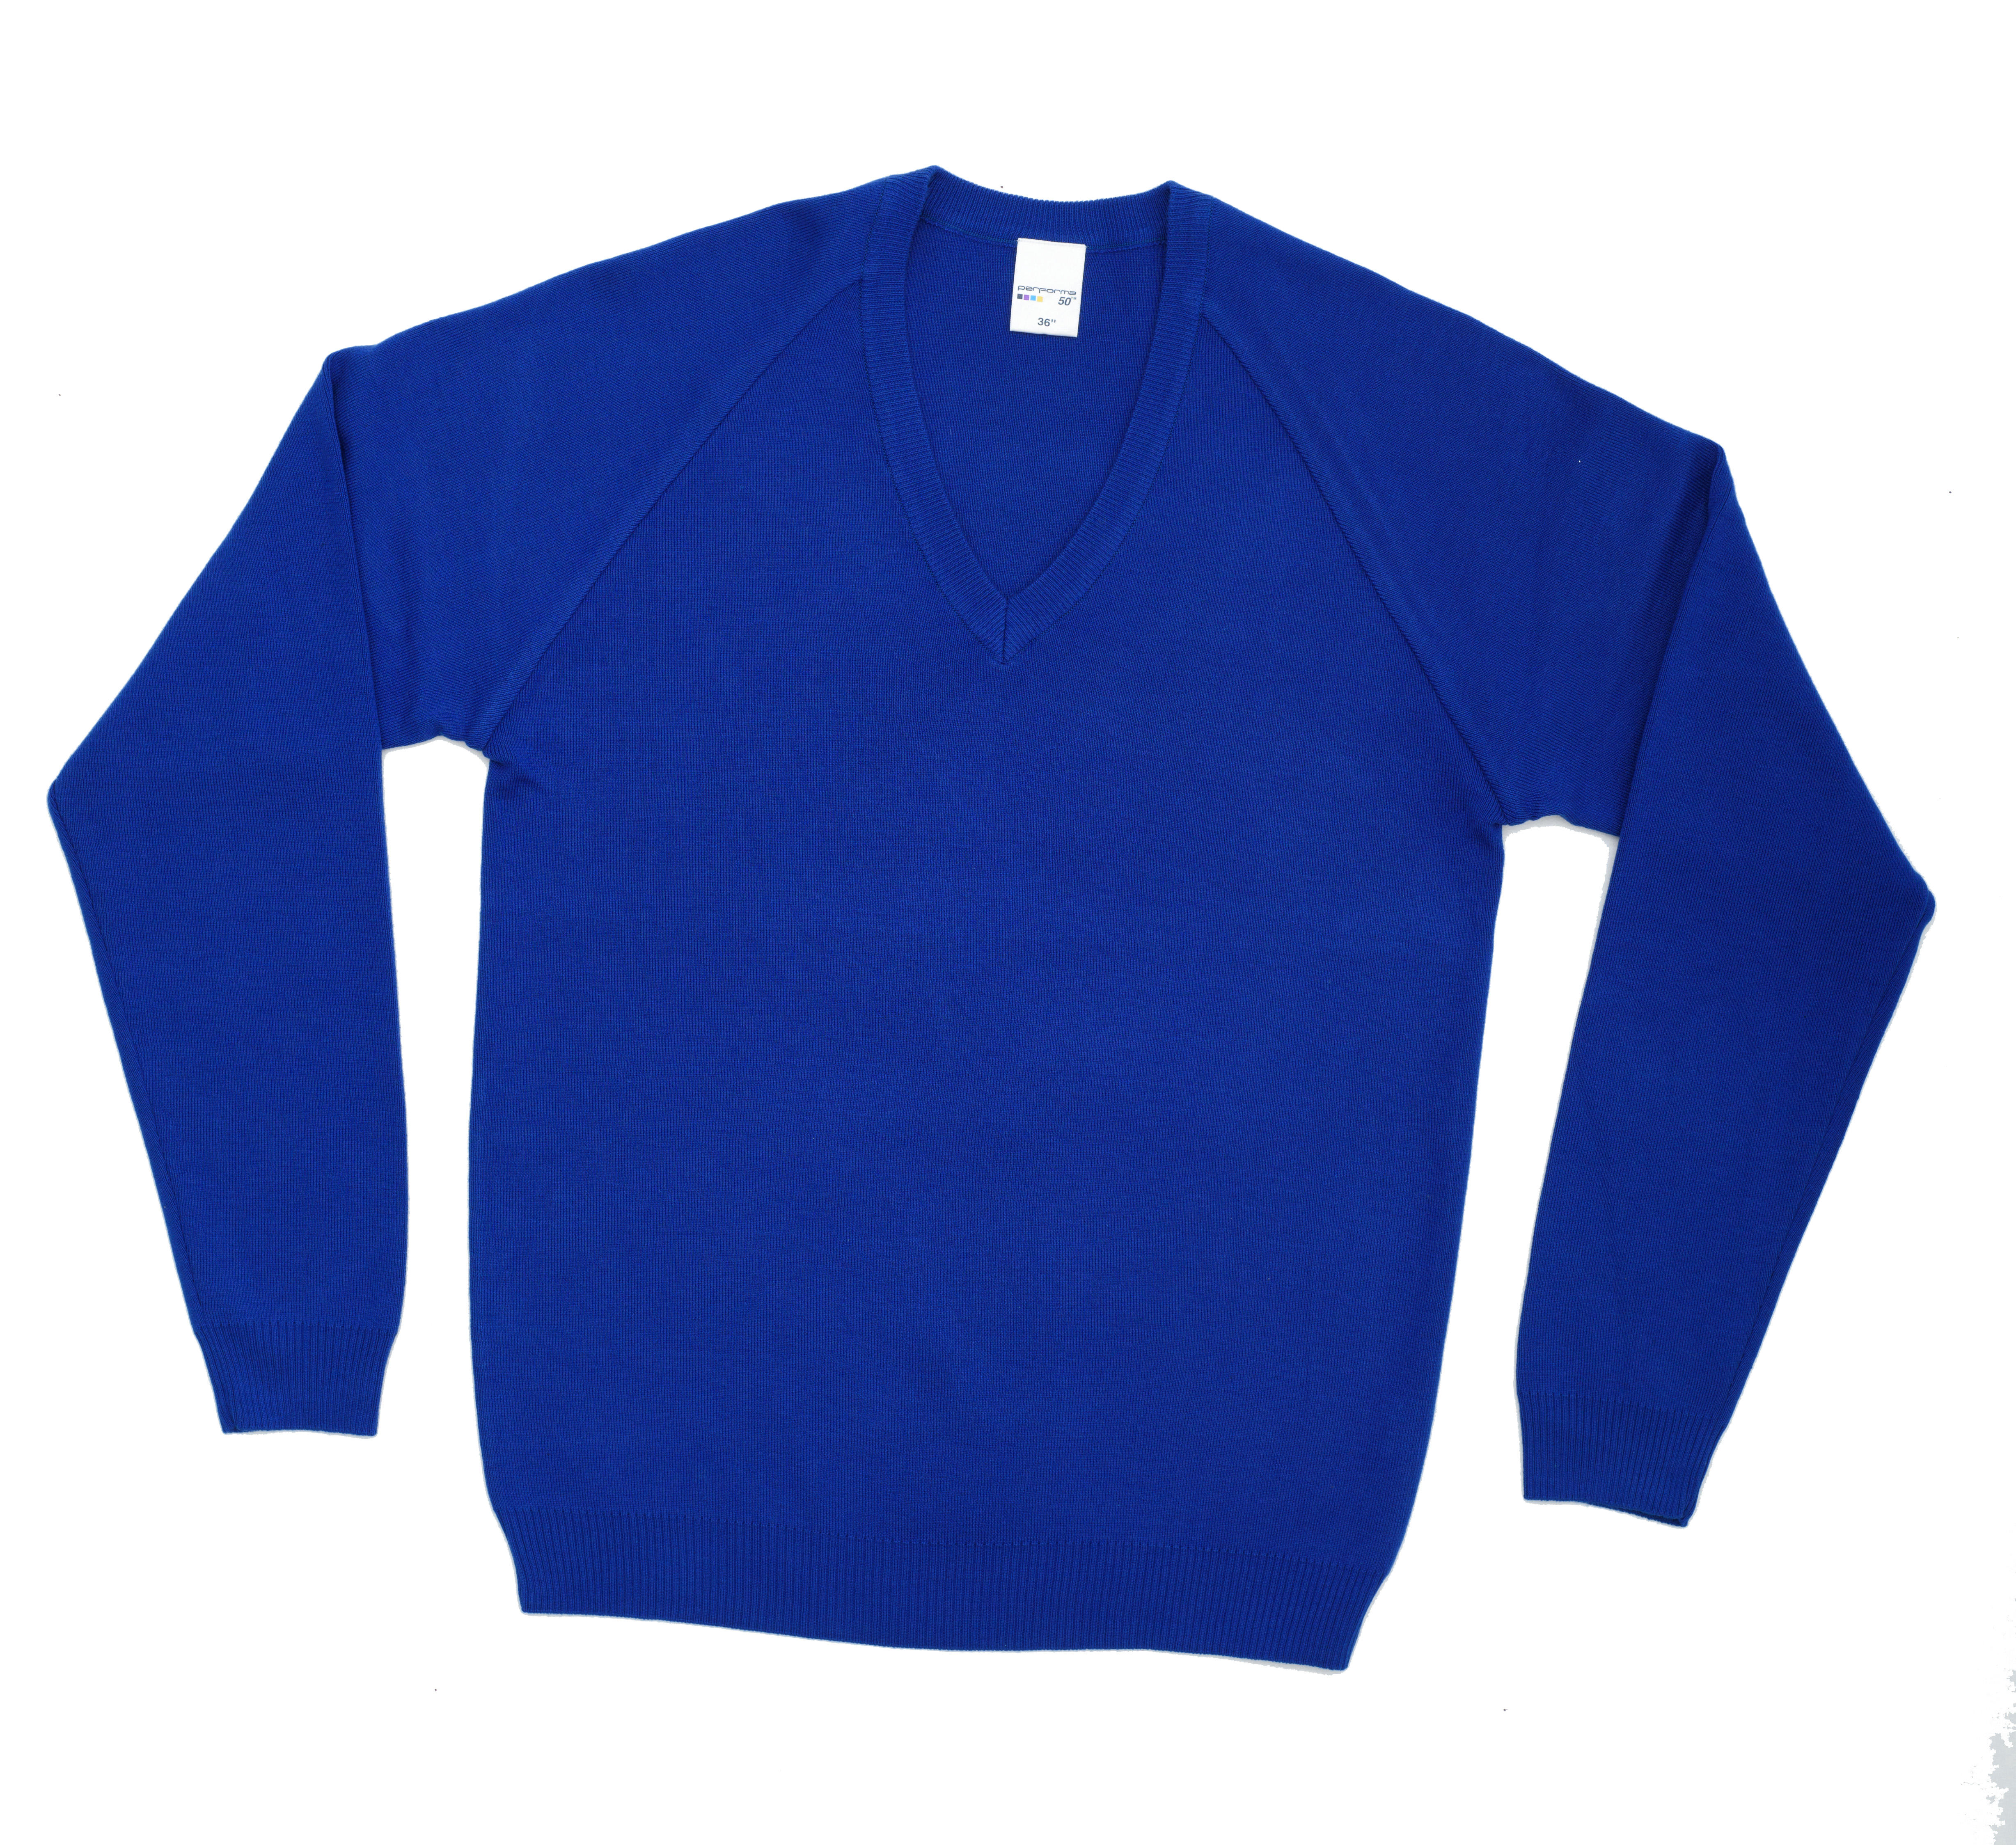 Performa 50 Knitted V-Neck Sweater